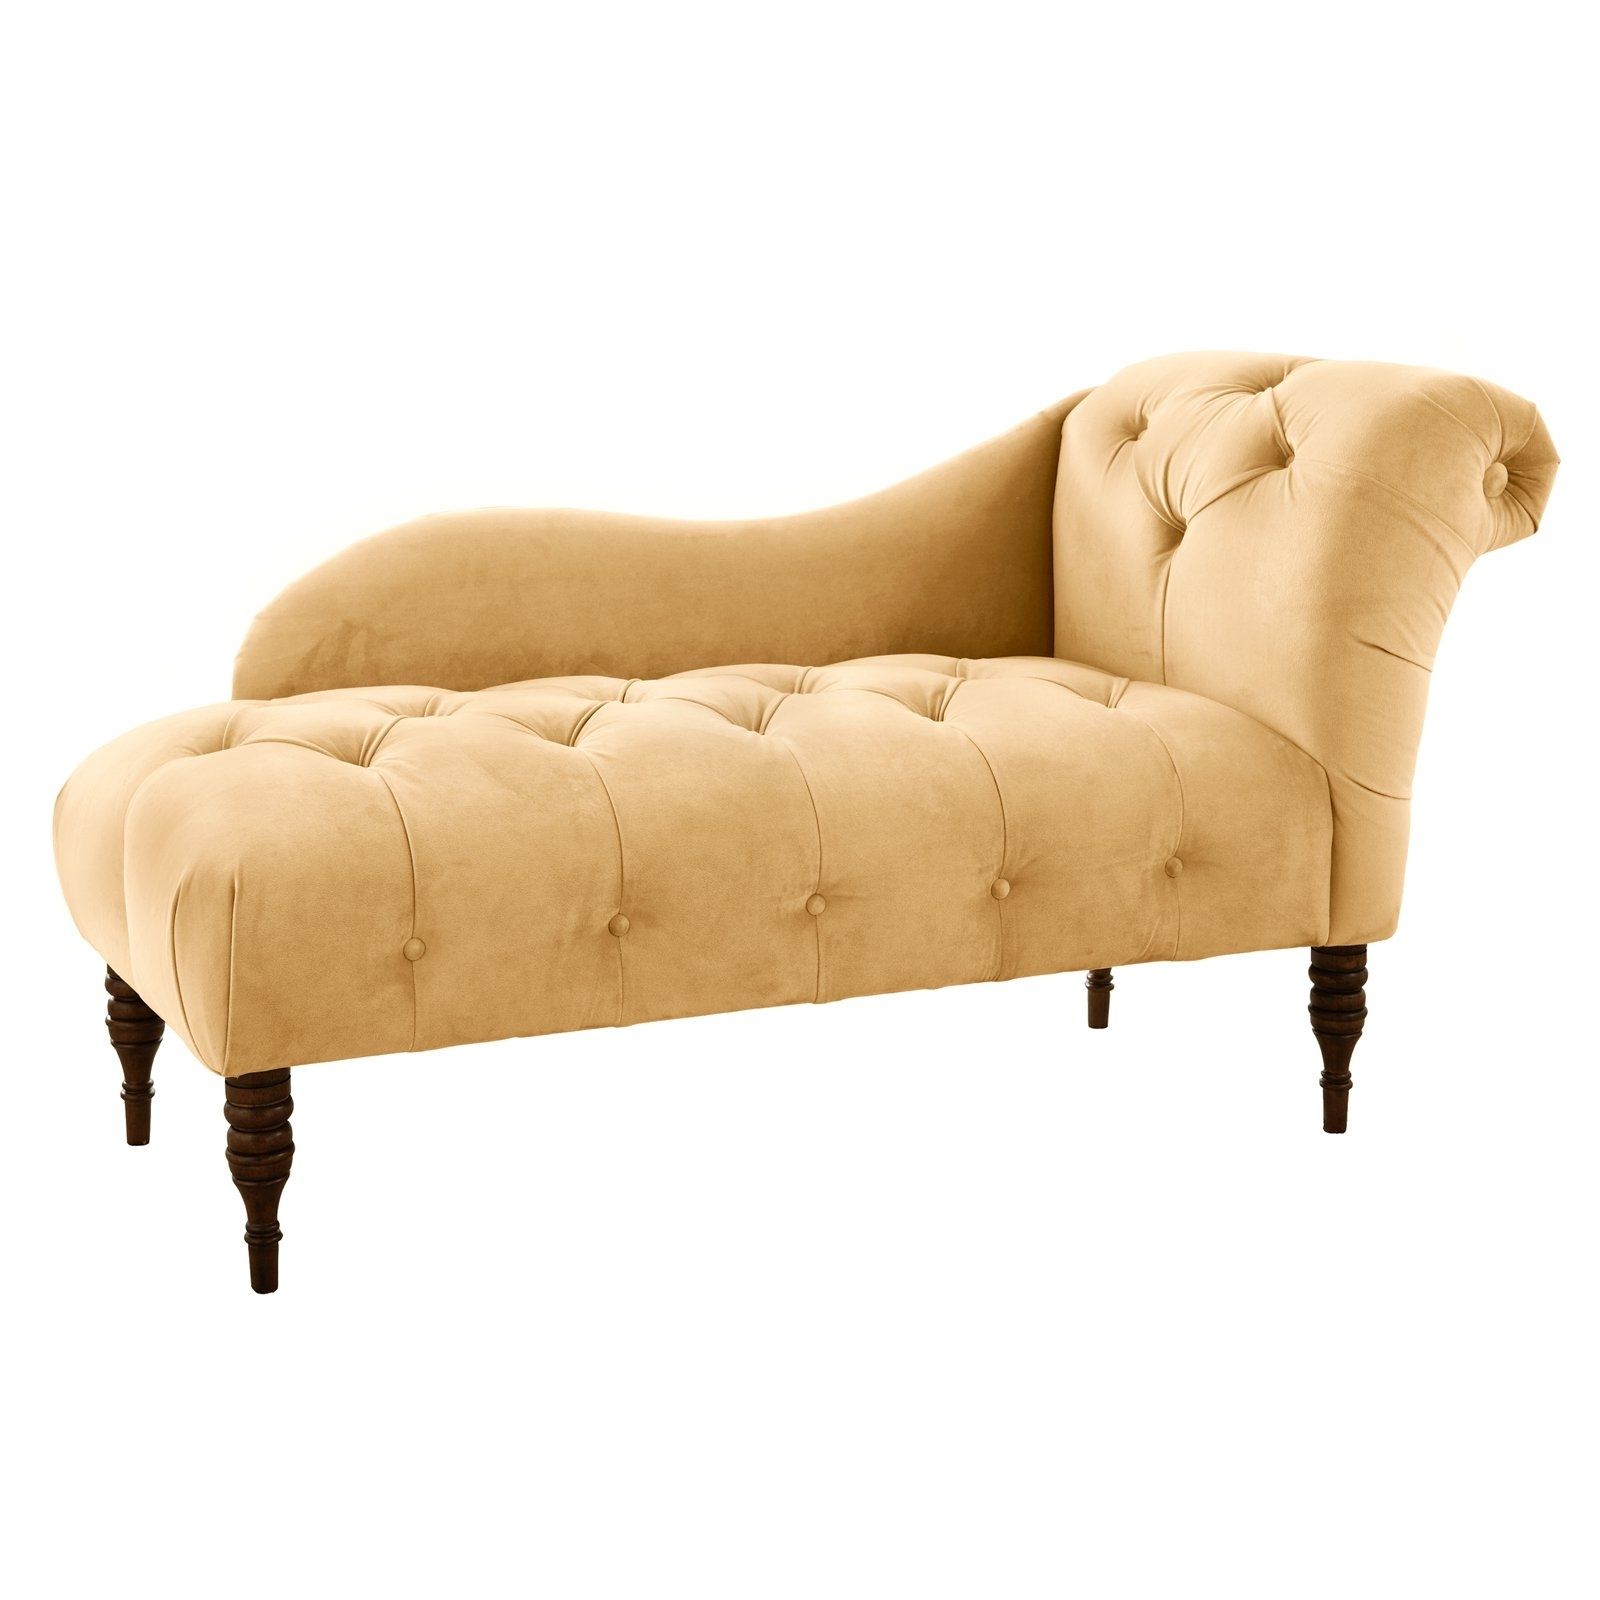 Cheap Chaise Lounges With Well Known Madison Tufted Chaise Lounge (View 5 of 15)